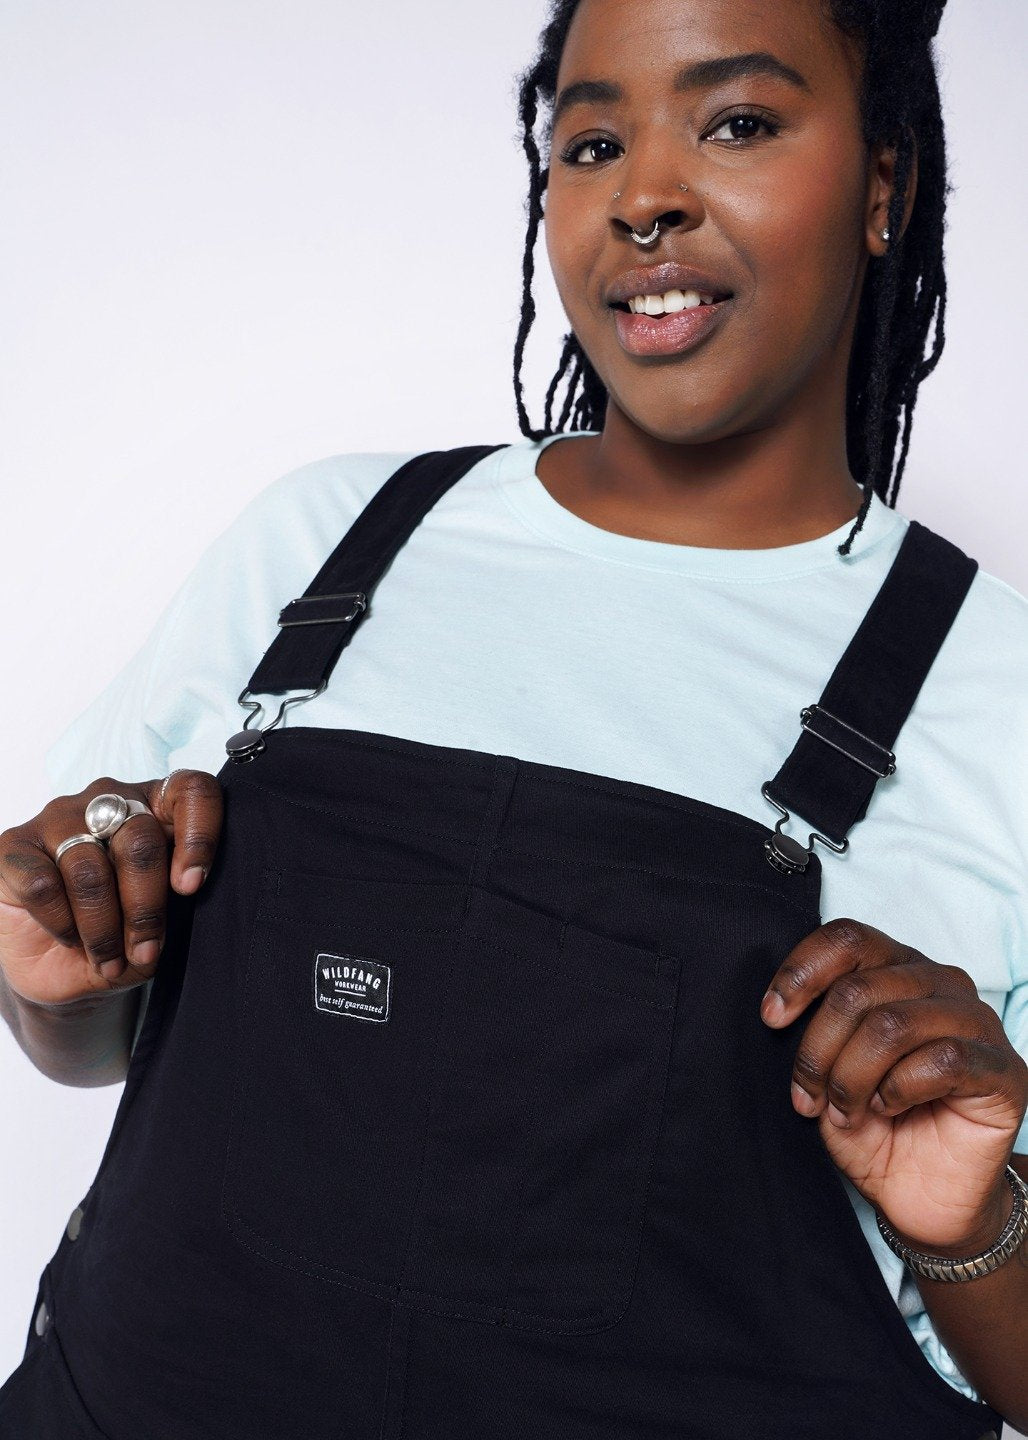 Model wearing black overalls with metal hardware in size XXL, with an blue tee underneath, holding front bib